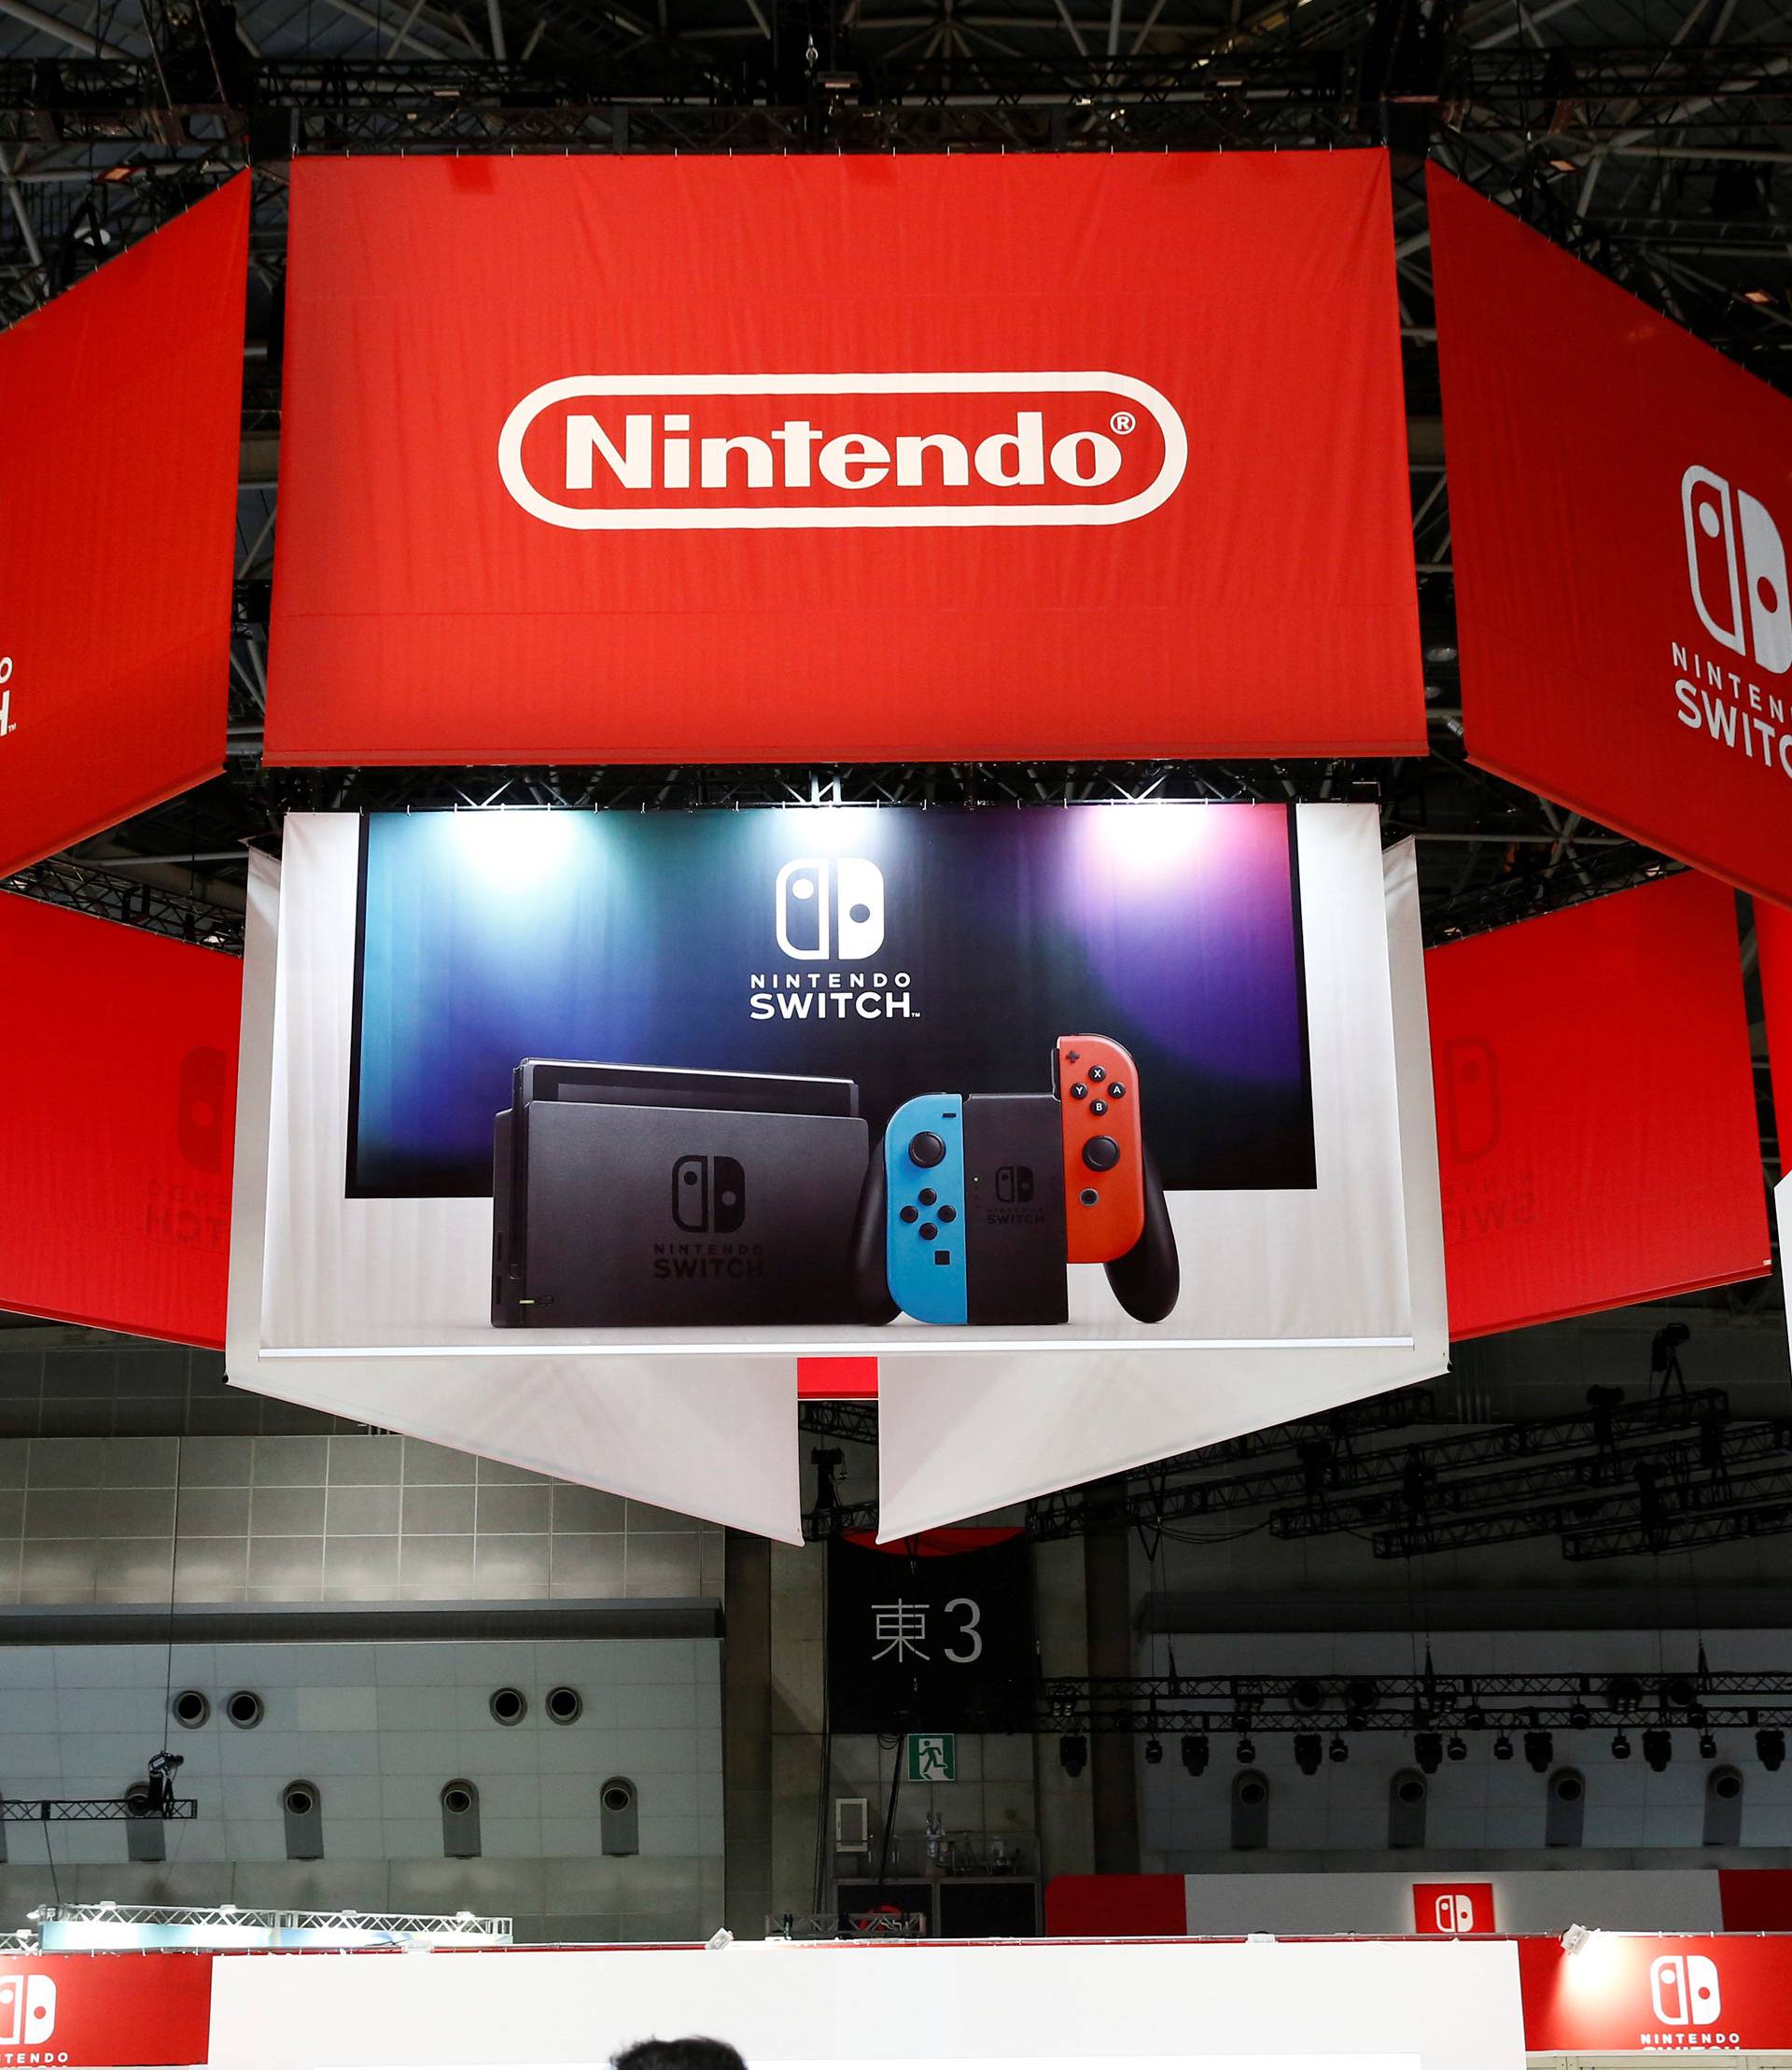 Banners of Nintendo's new game console Switch are pictured at its experience venue in Tokyo